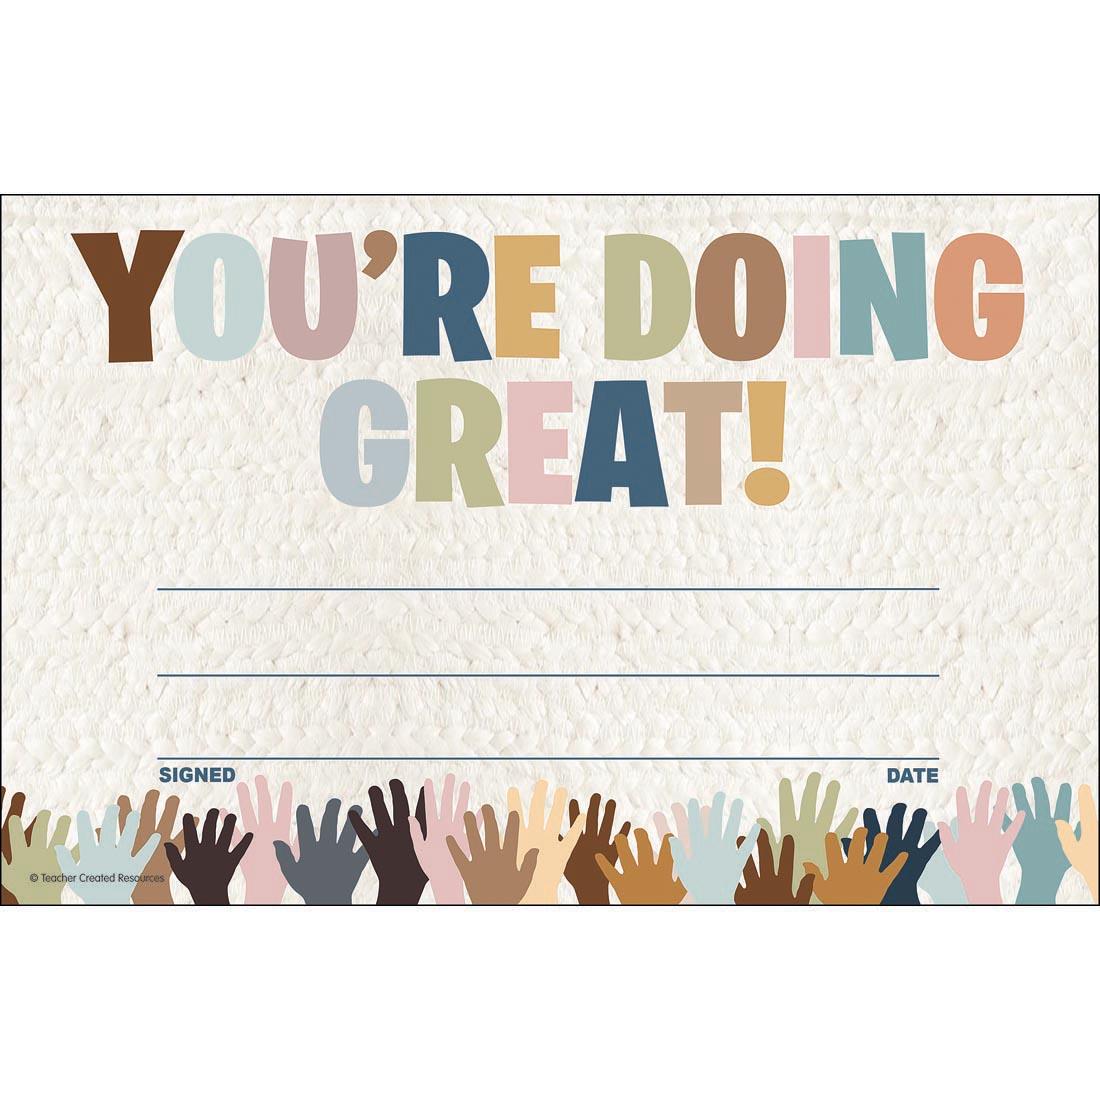 You're Doing Great! Award from the Everyone is Welcome collection by Teacher Created Resources